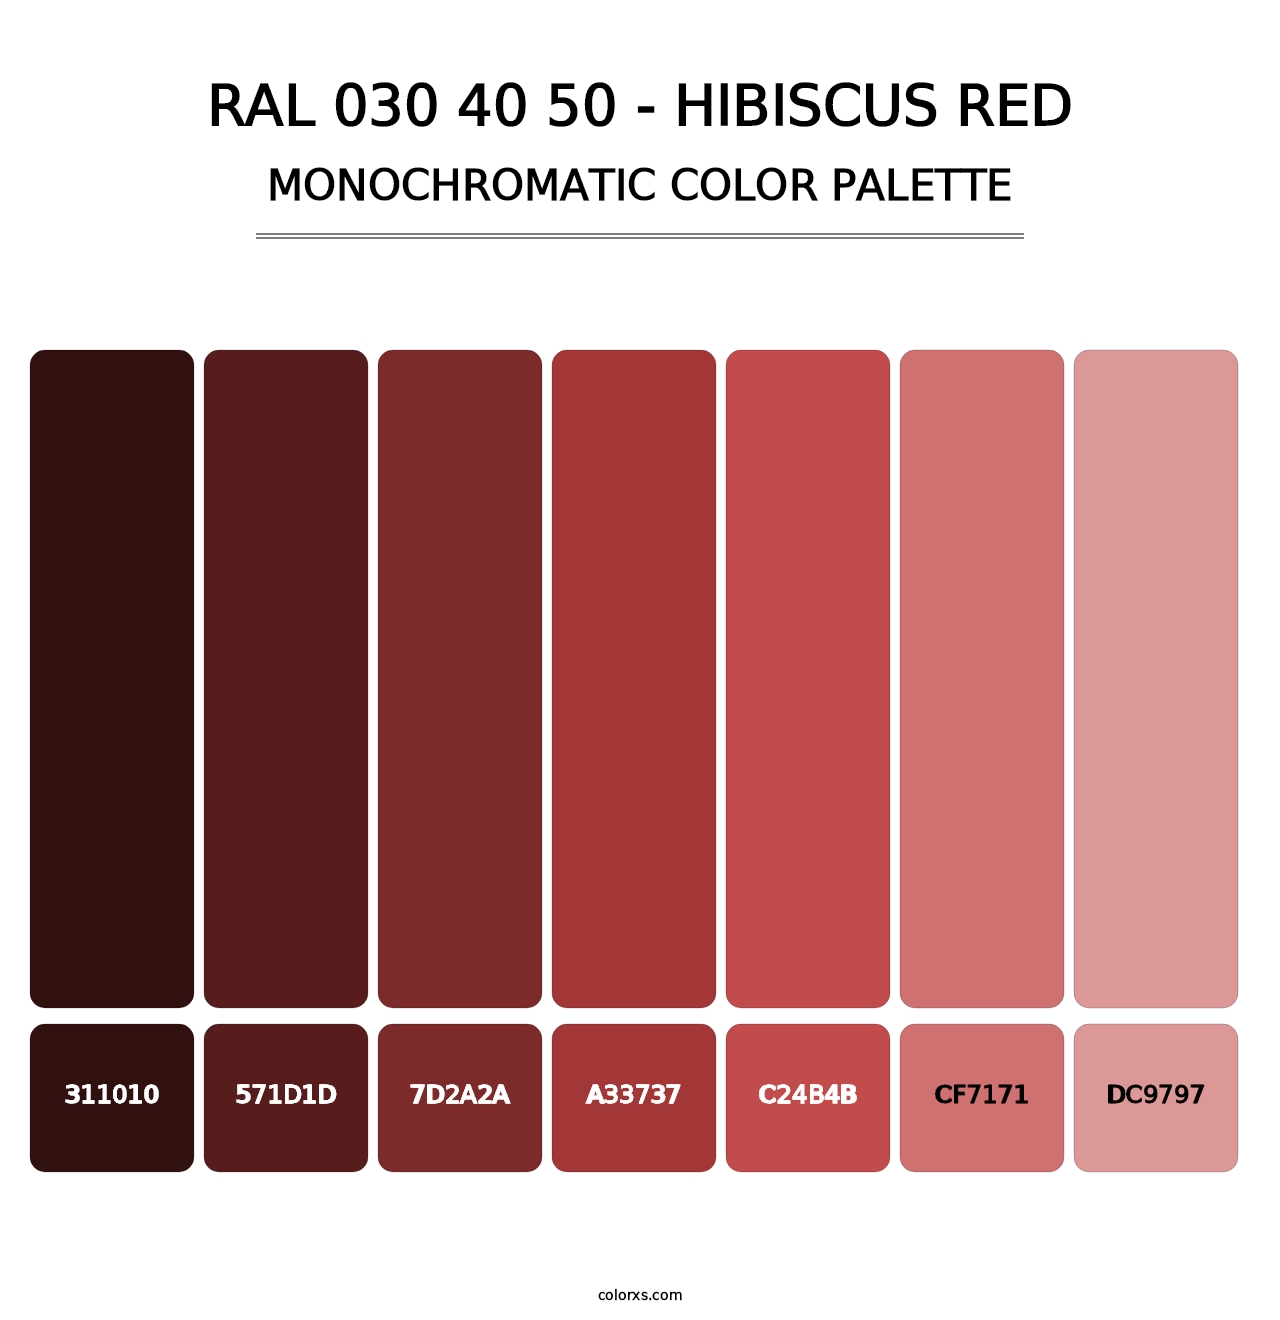 RAL 030 40 50 - Hibiscus Red - Monochromatic Color Palette